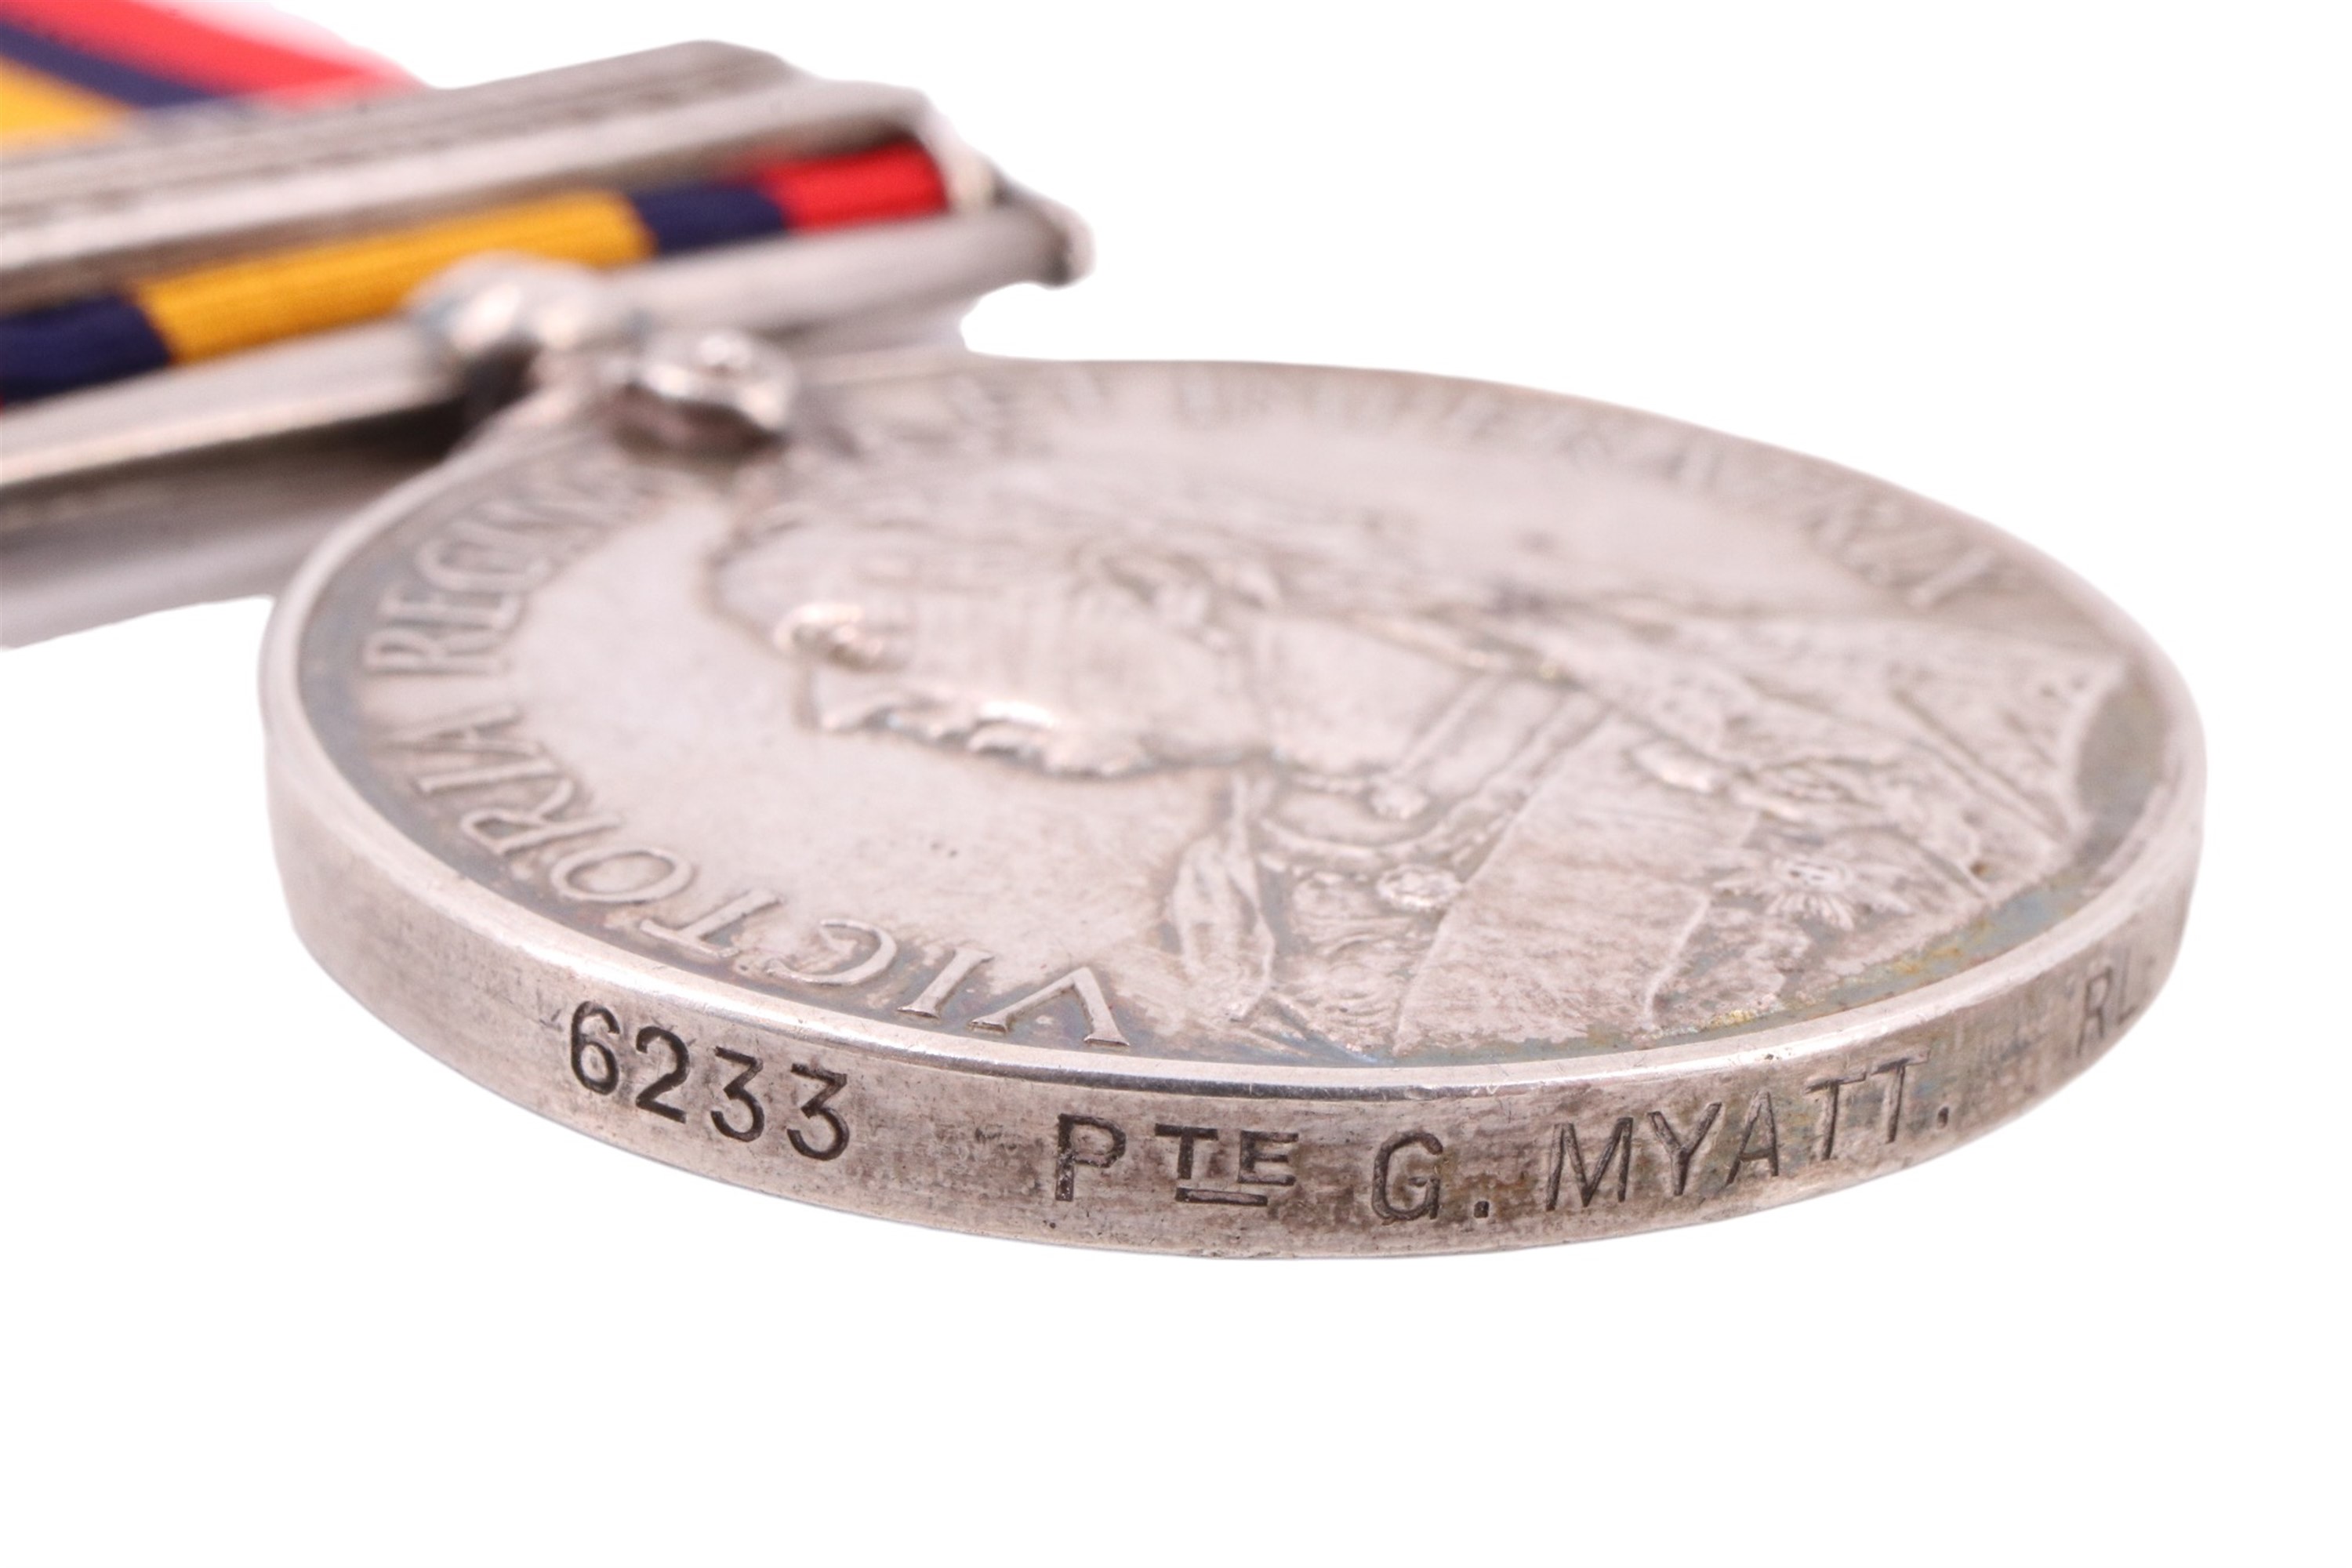 A Queen's South Africa Medal with two clasps to 6233 Pte G Myatt, Rl Warwick Regt, with research - Image 3 of 7